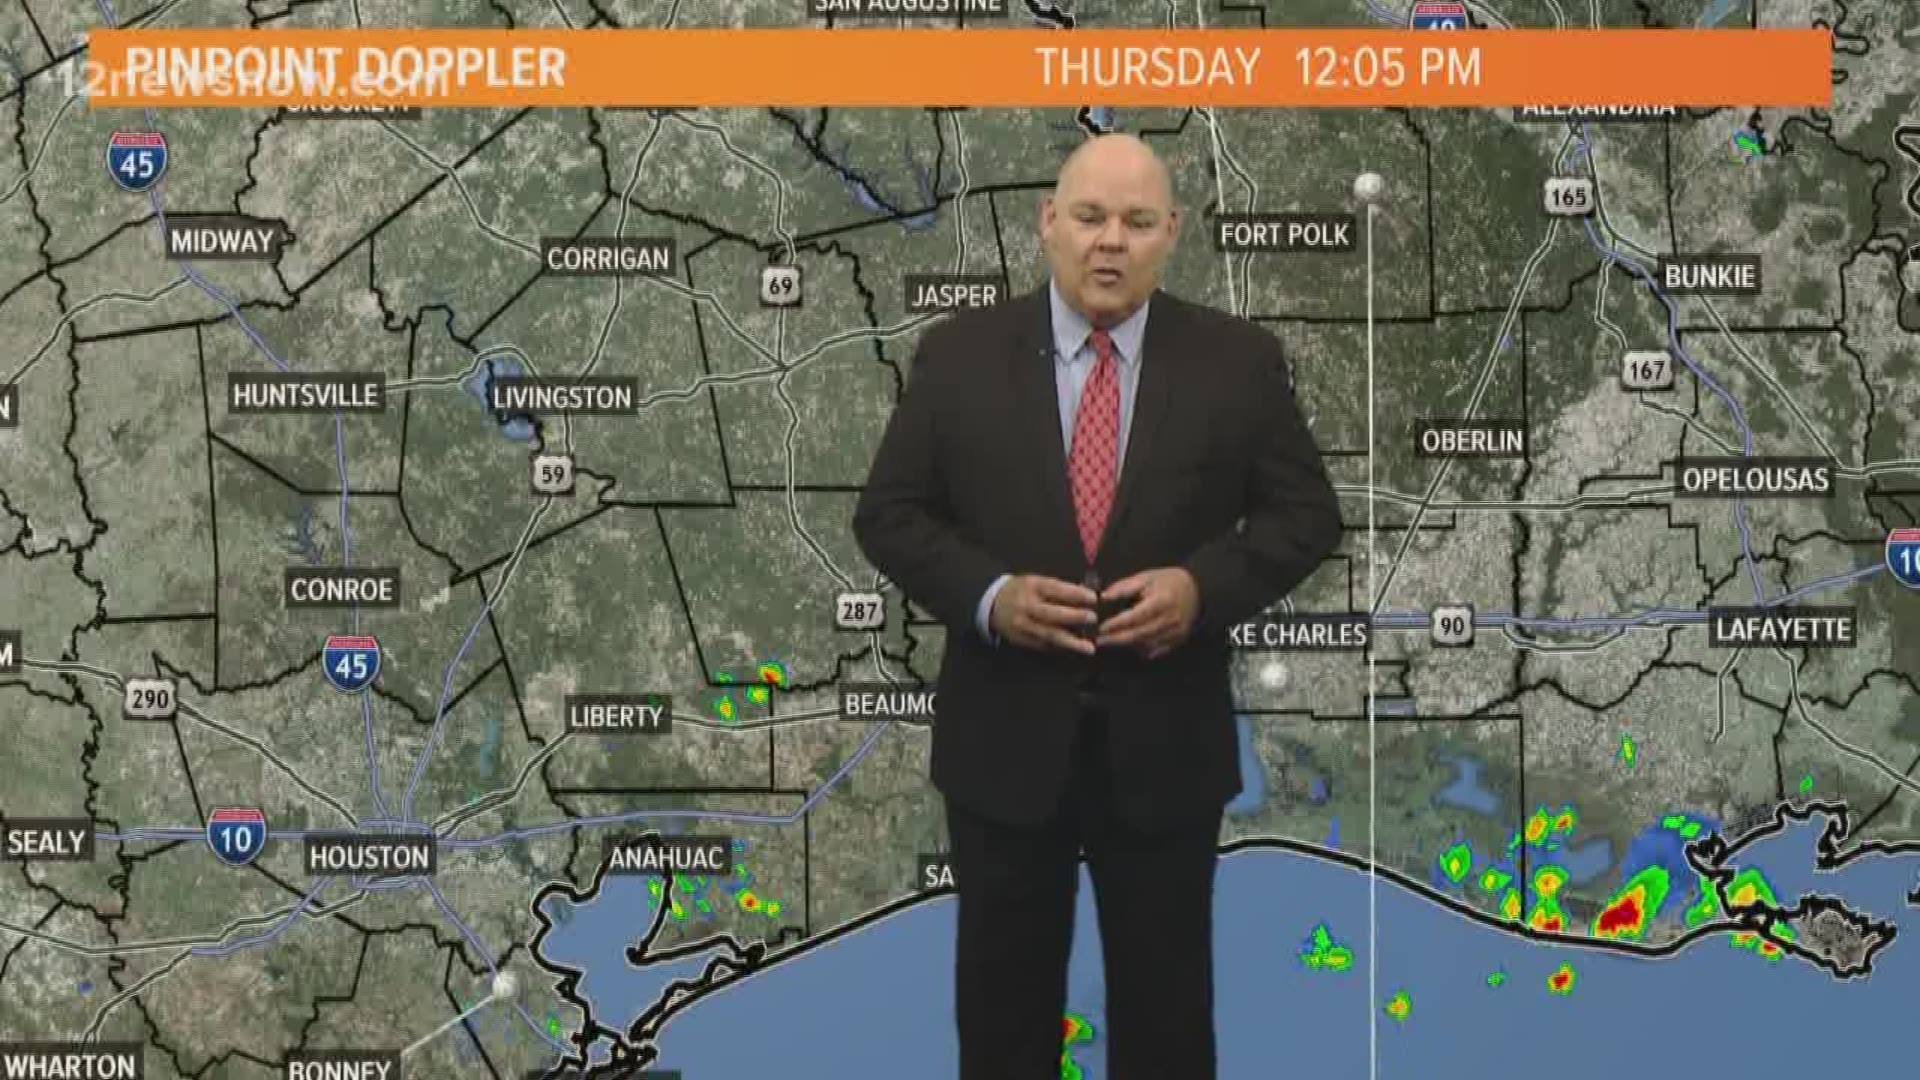 12News meteorologist Jeff Gerber says another round of scattered showers is in the forecast Thursday